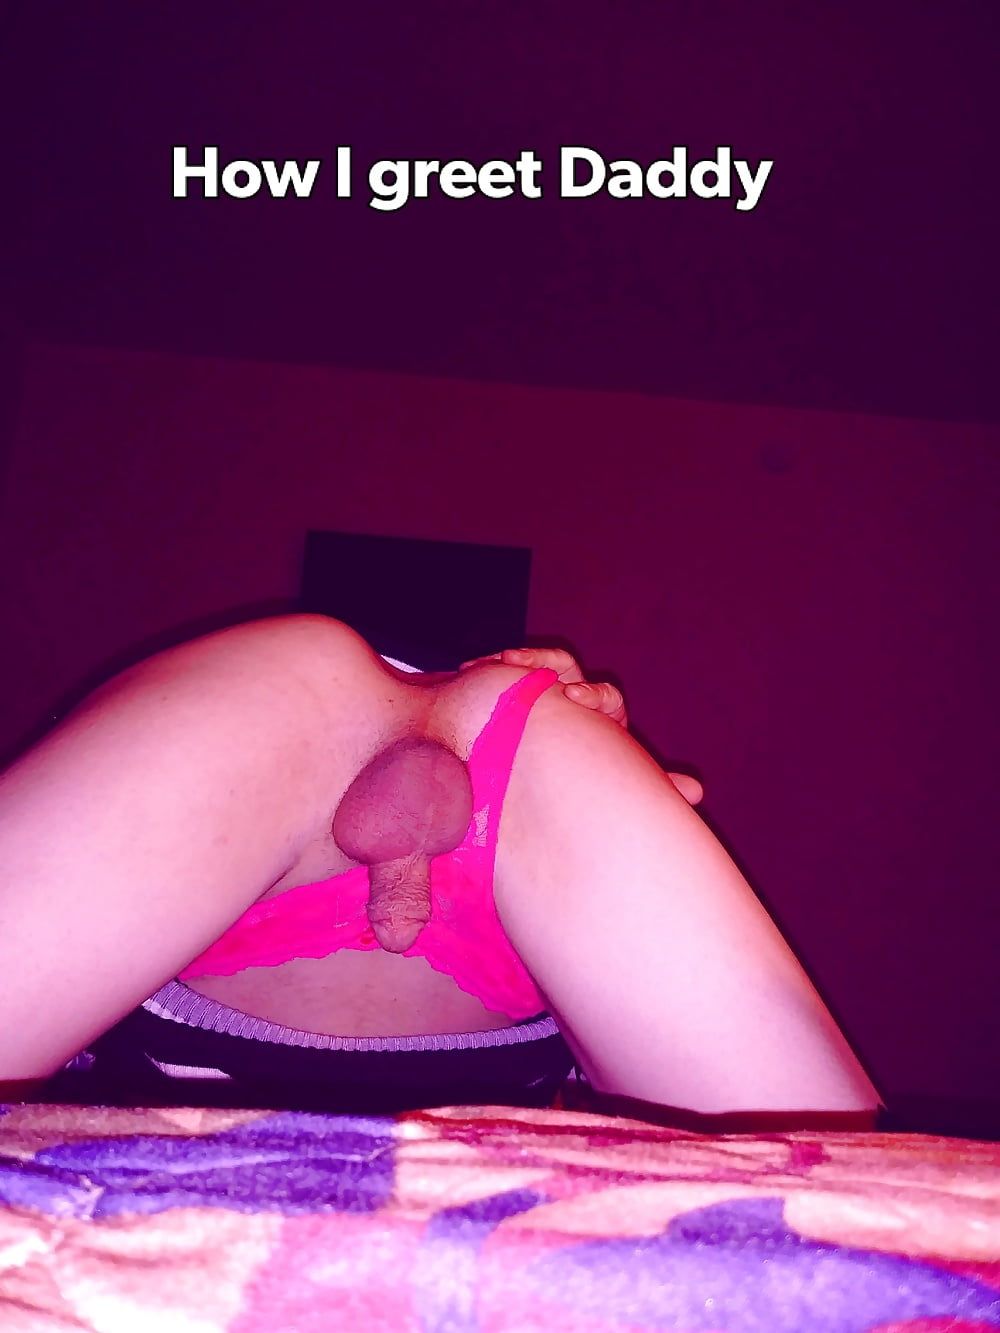 Taking daddy dick inside my tight little pink butthole #8